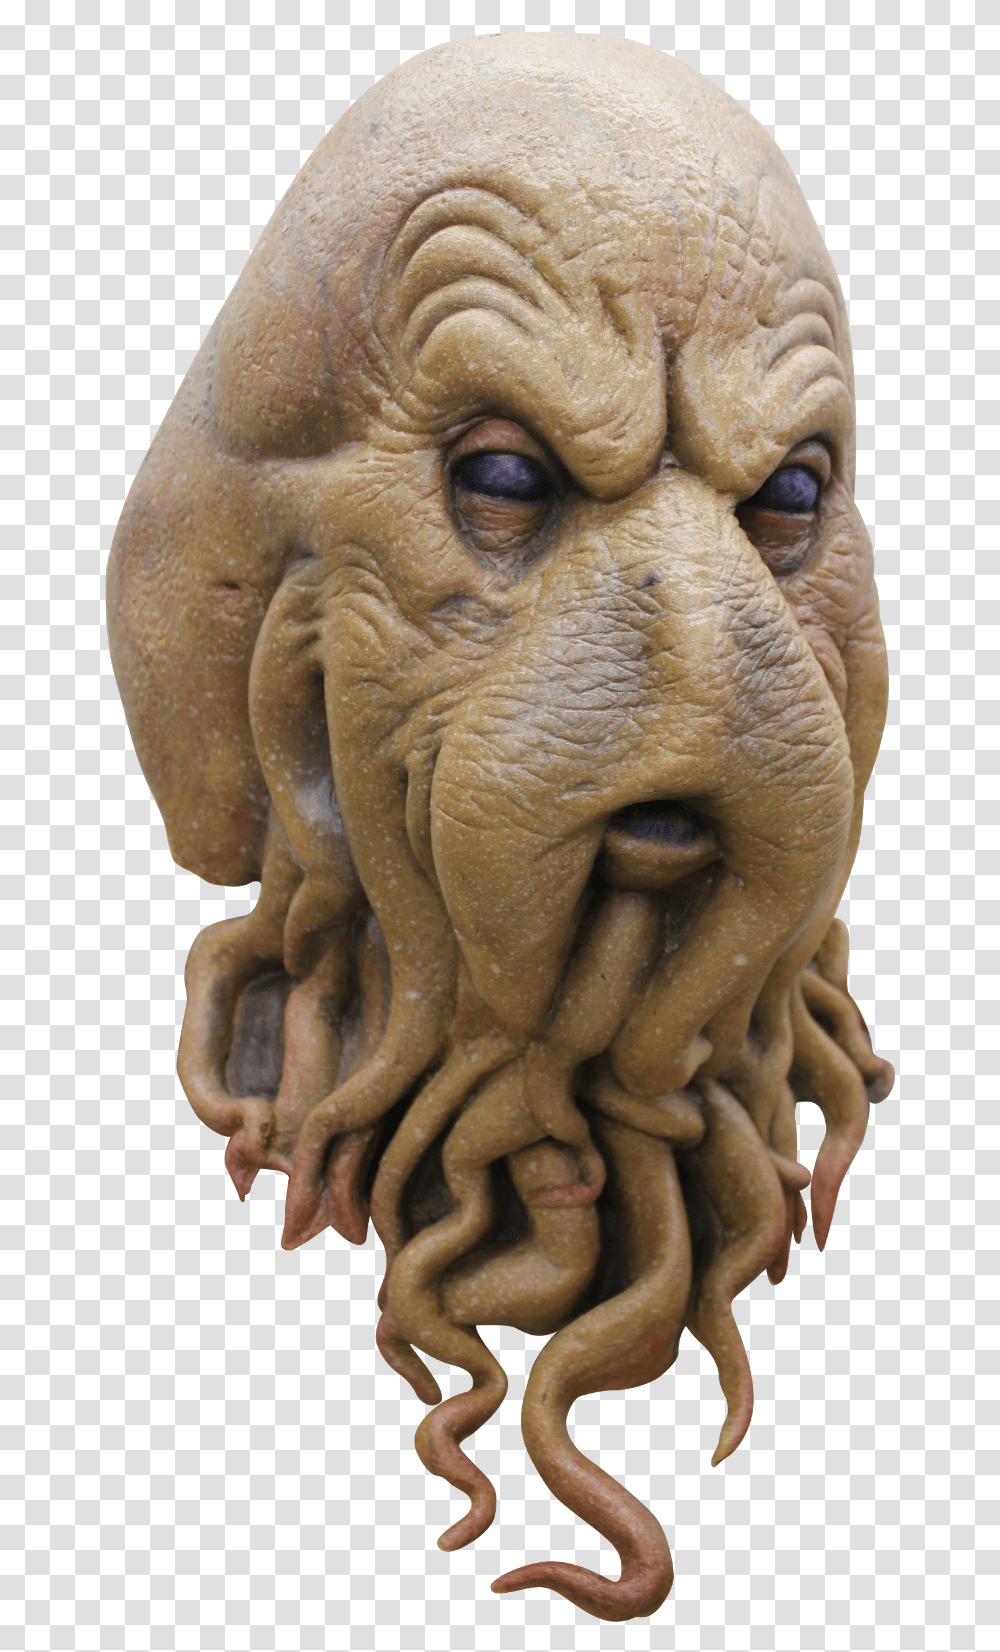 Pirate Of The Caribbean Cthulhu, Statue, Sculpture, Ornament Transparent Png